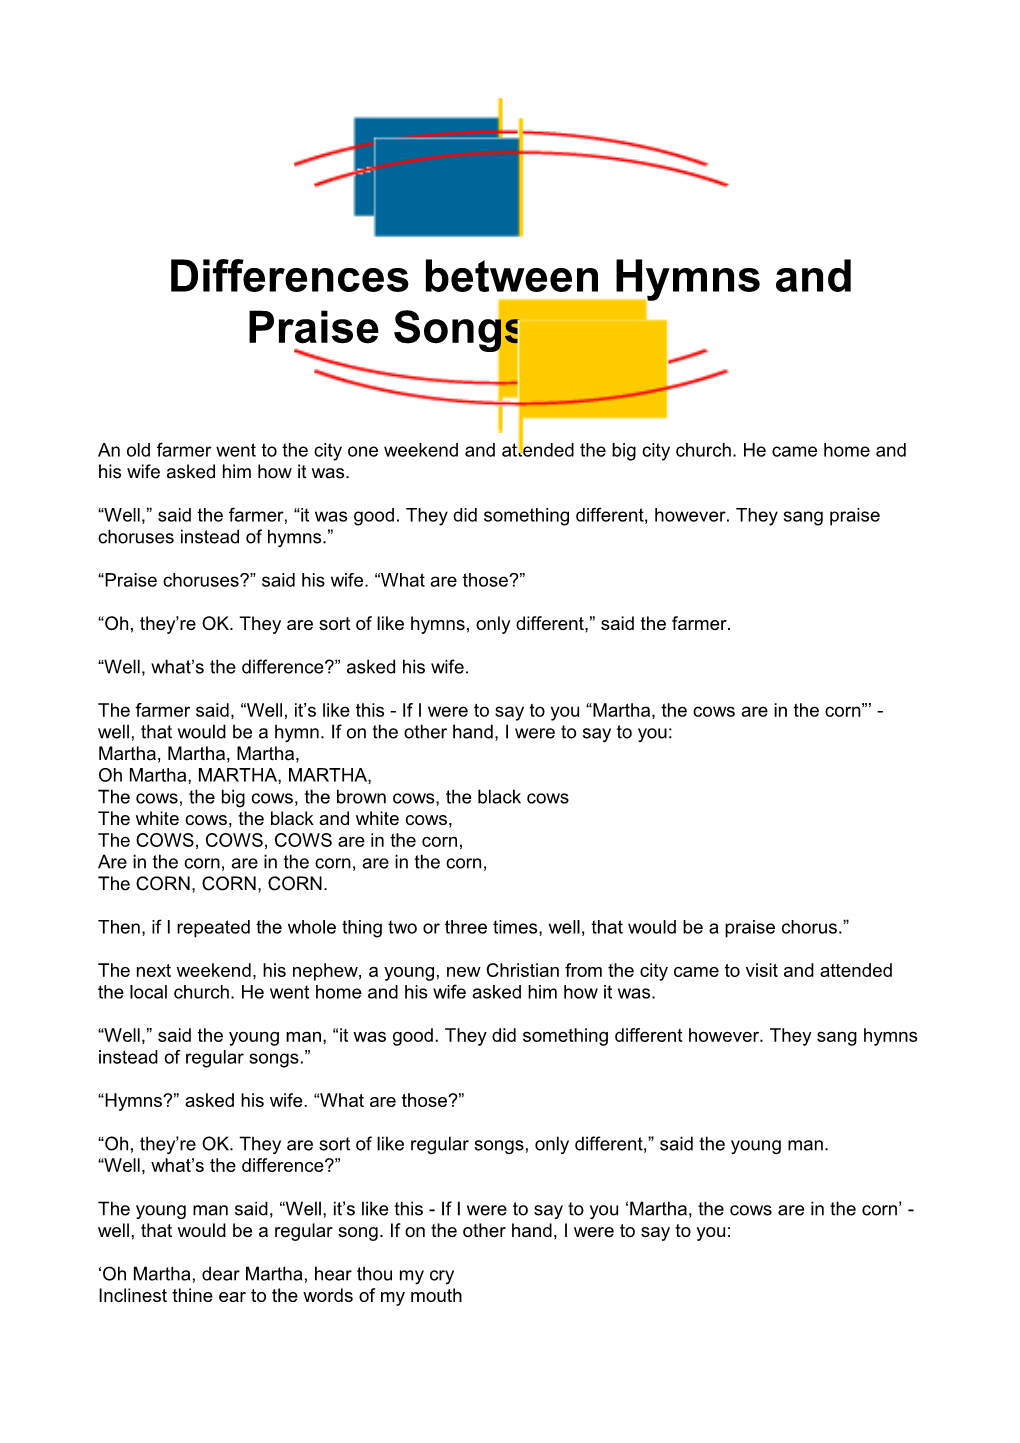 Differences Between Hymns and Praise Songs